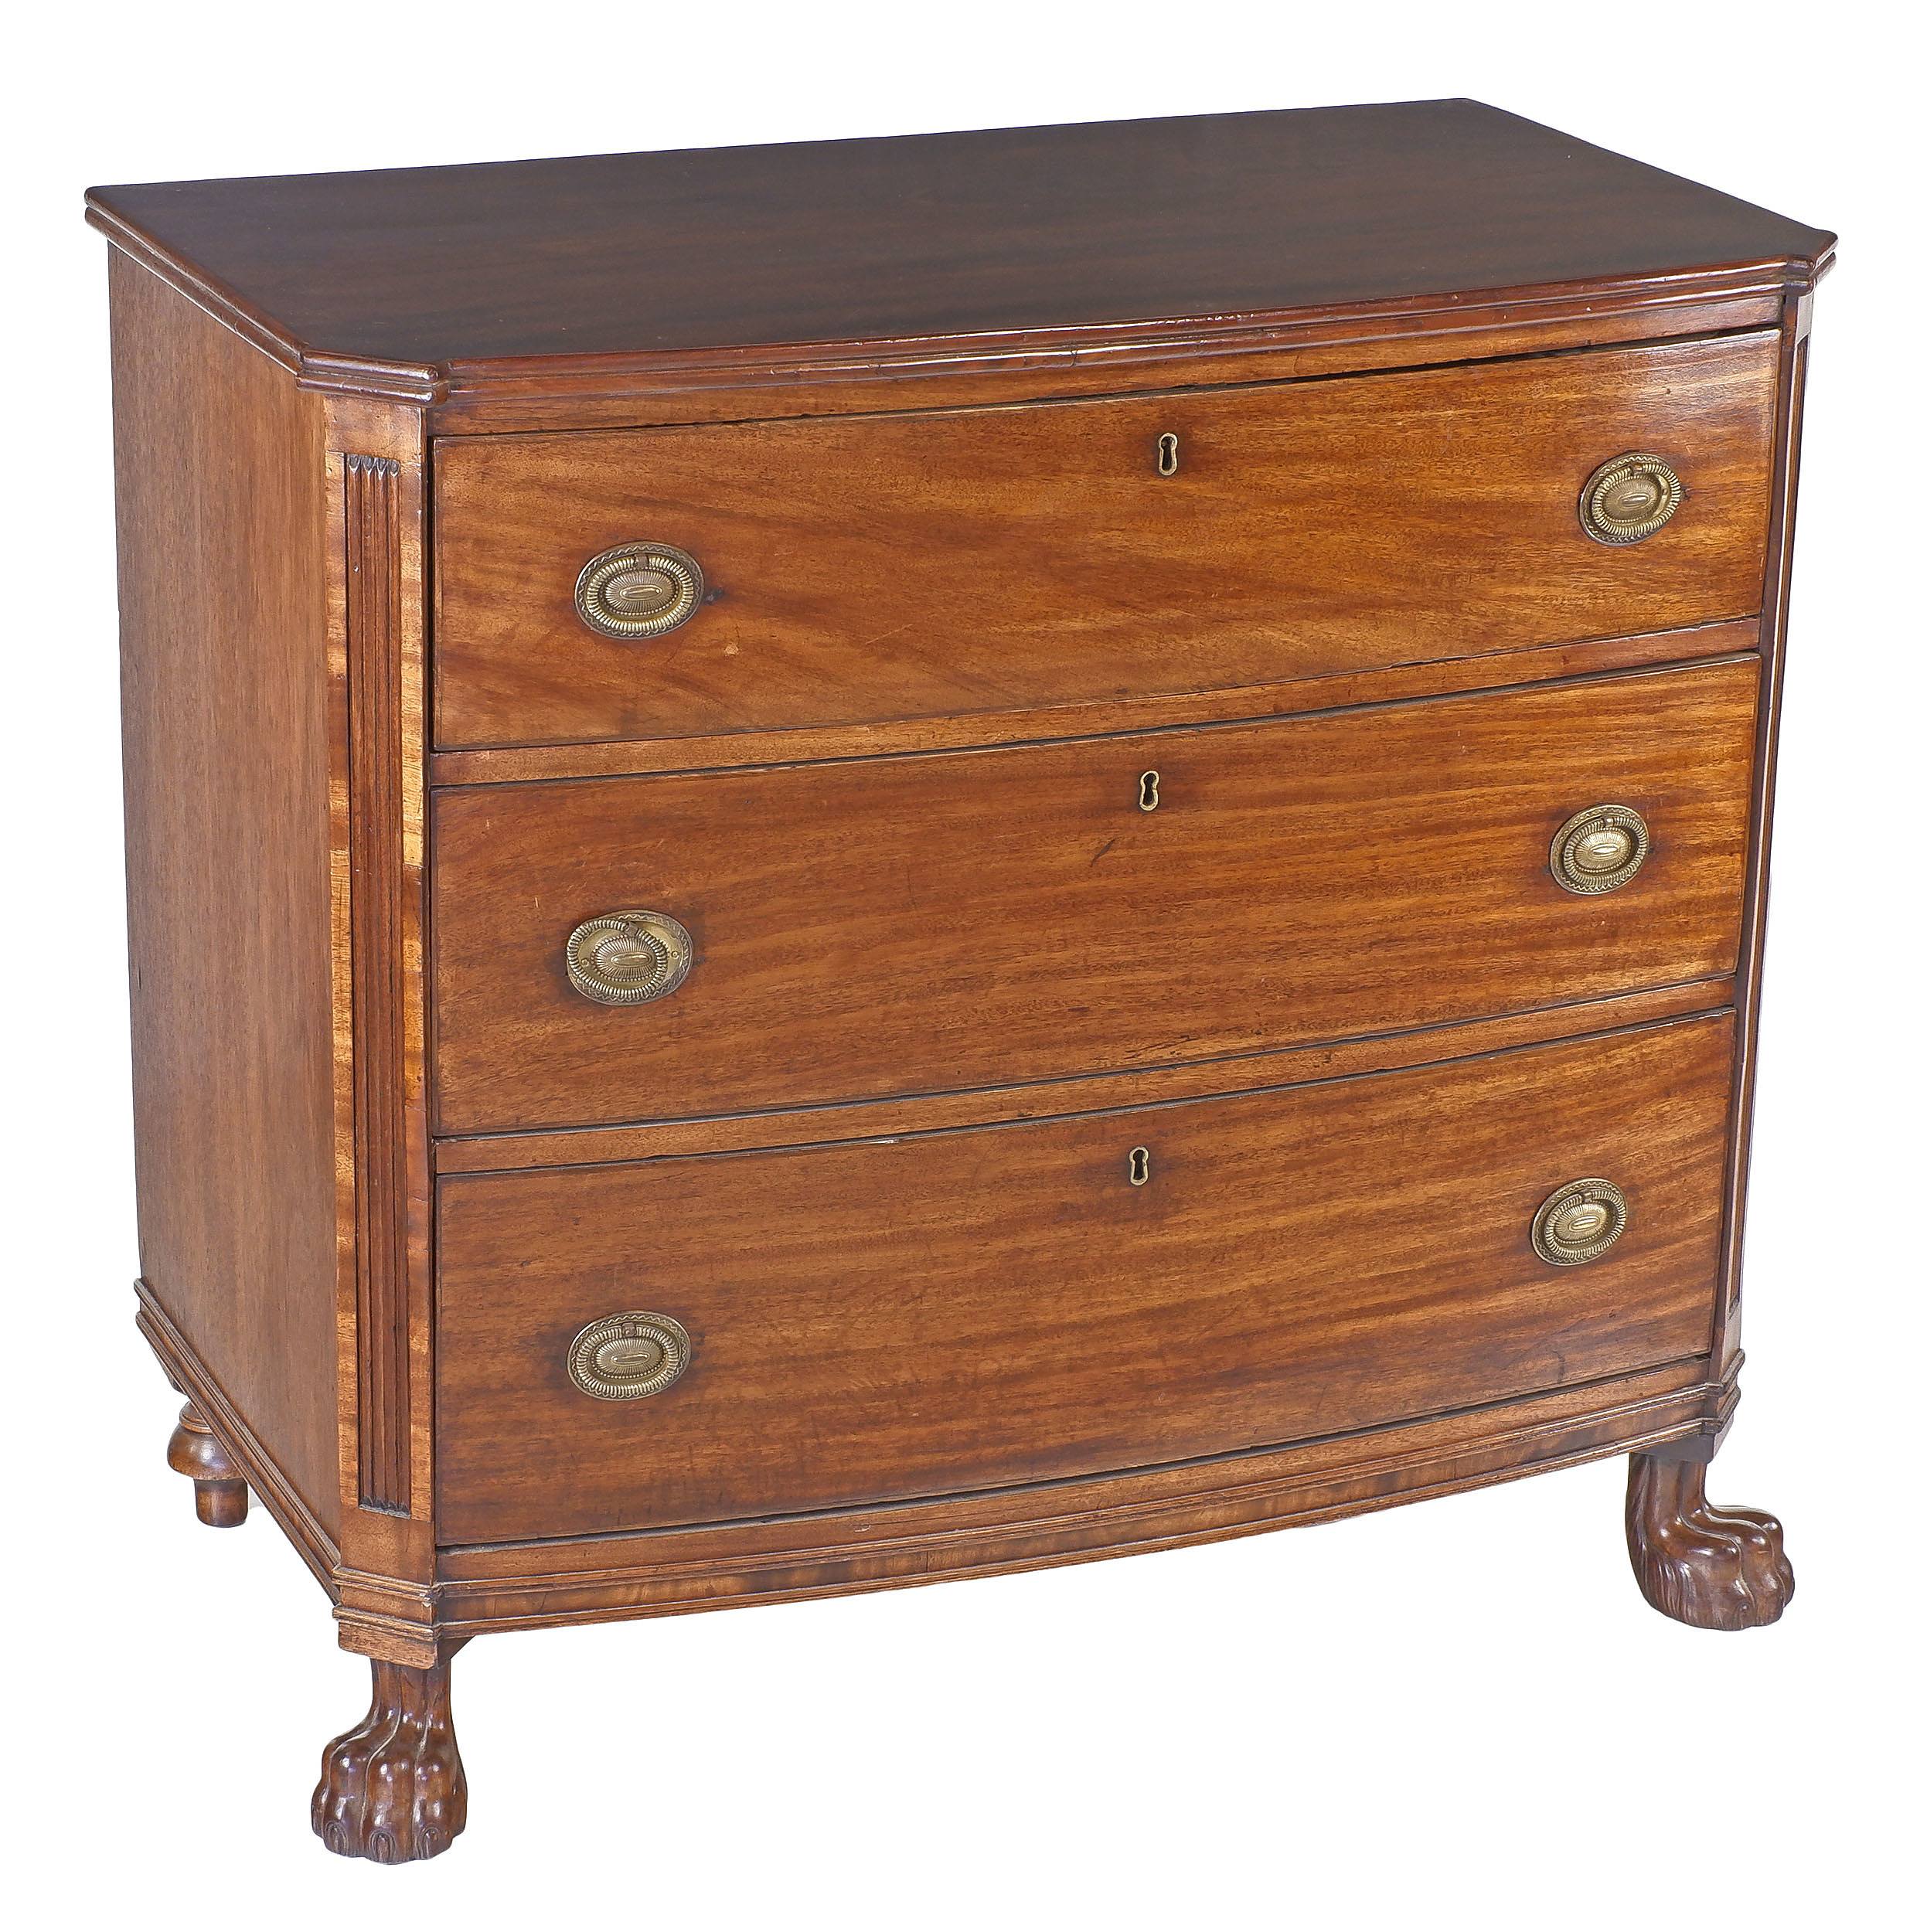 'Regency Bow Front Three Drawer Chest of Small Proportions with Lions Paw Feet Circa 1820'